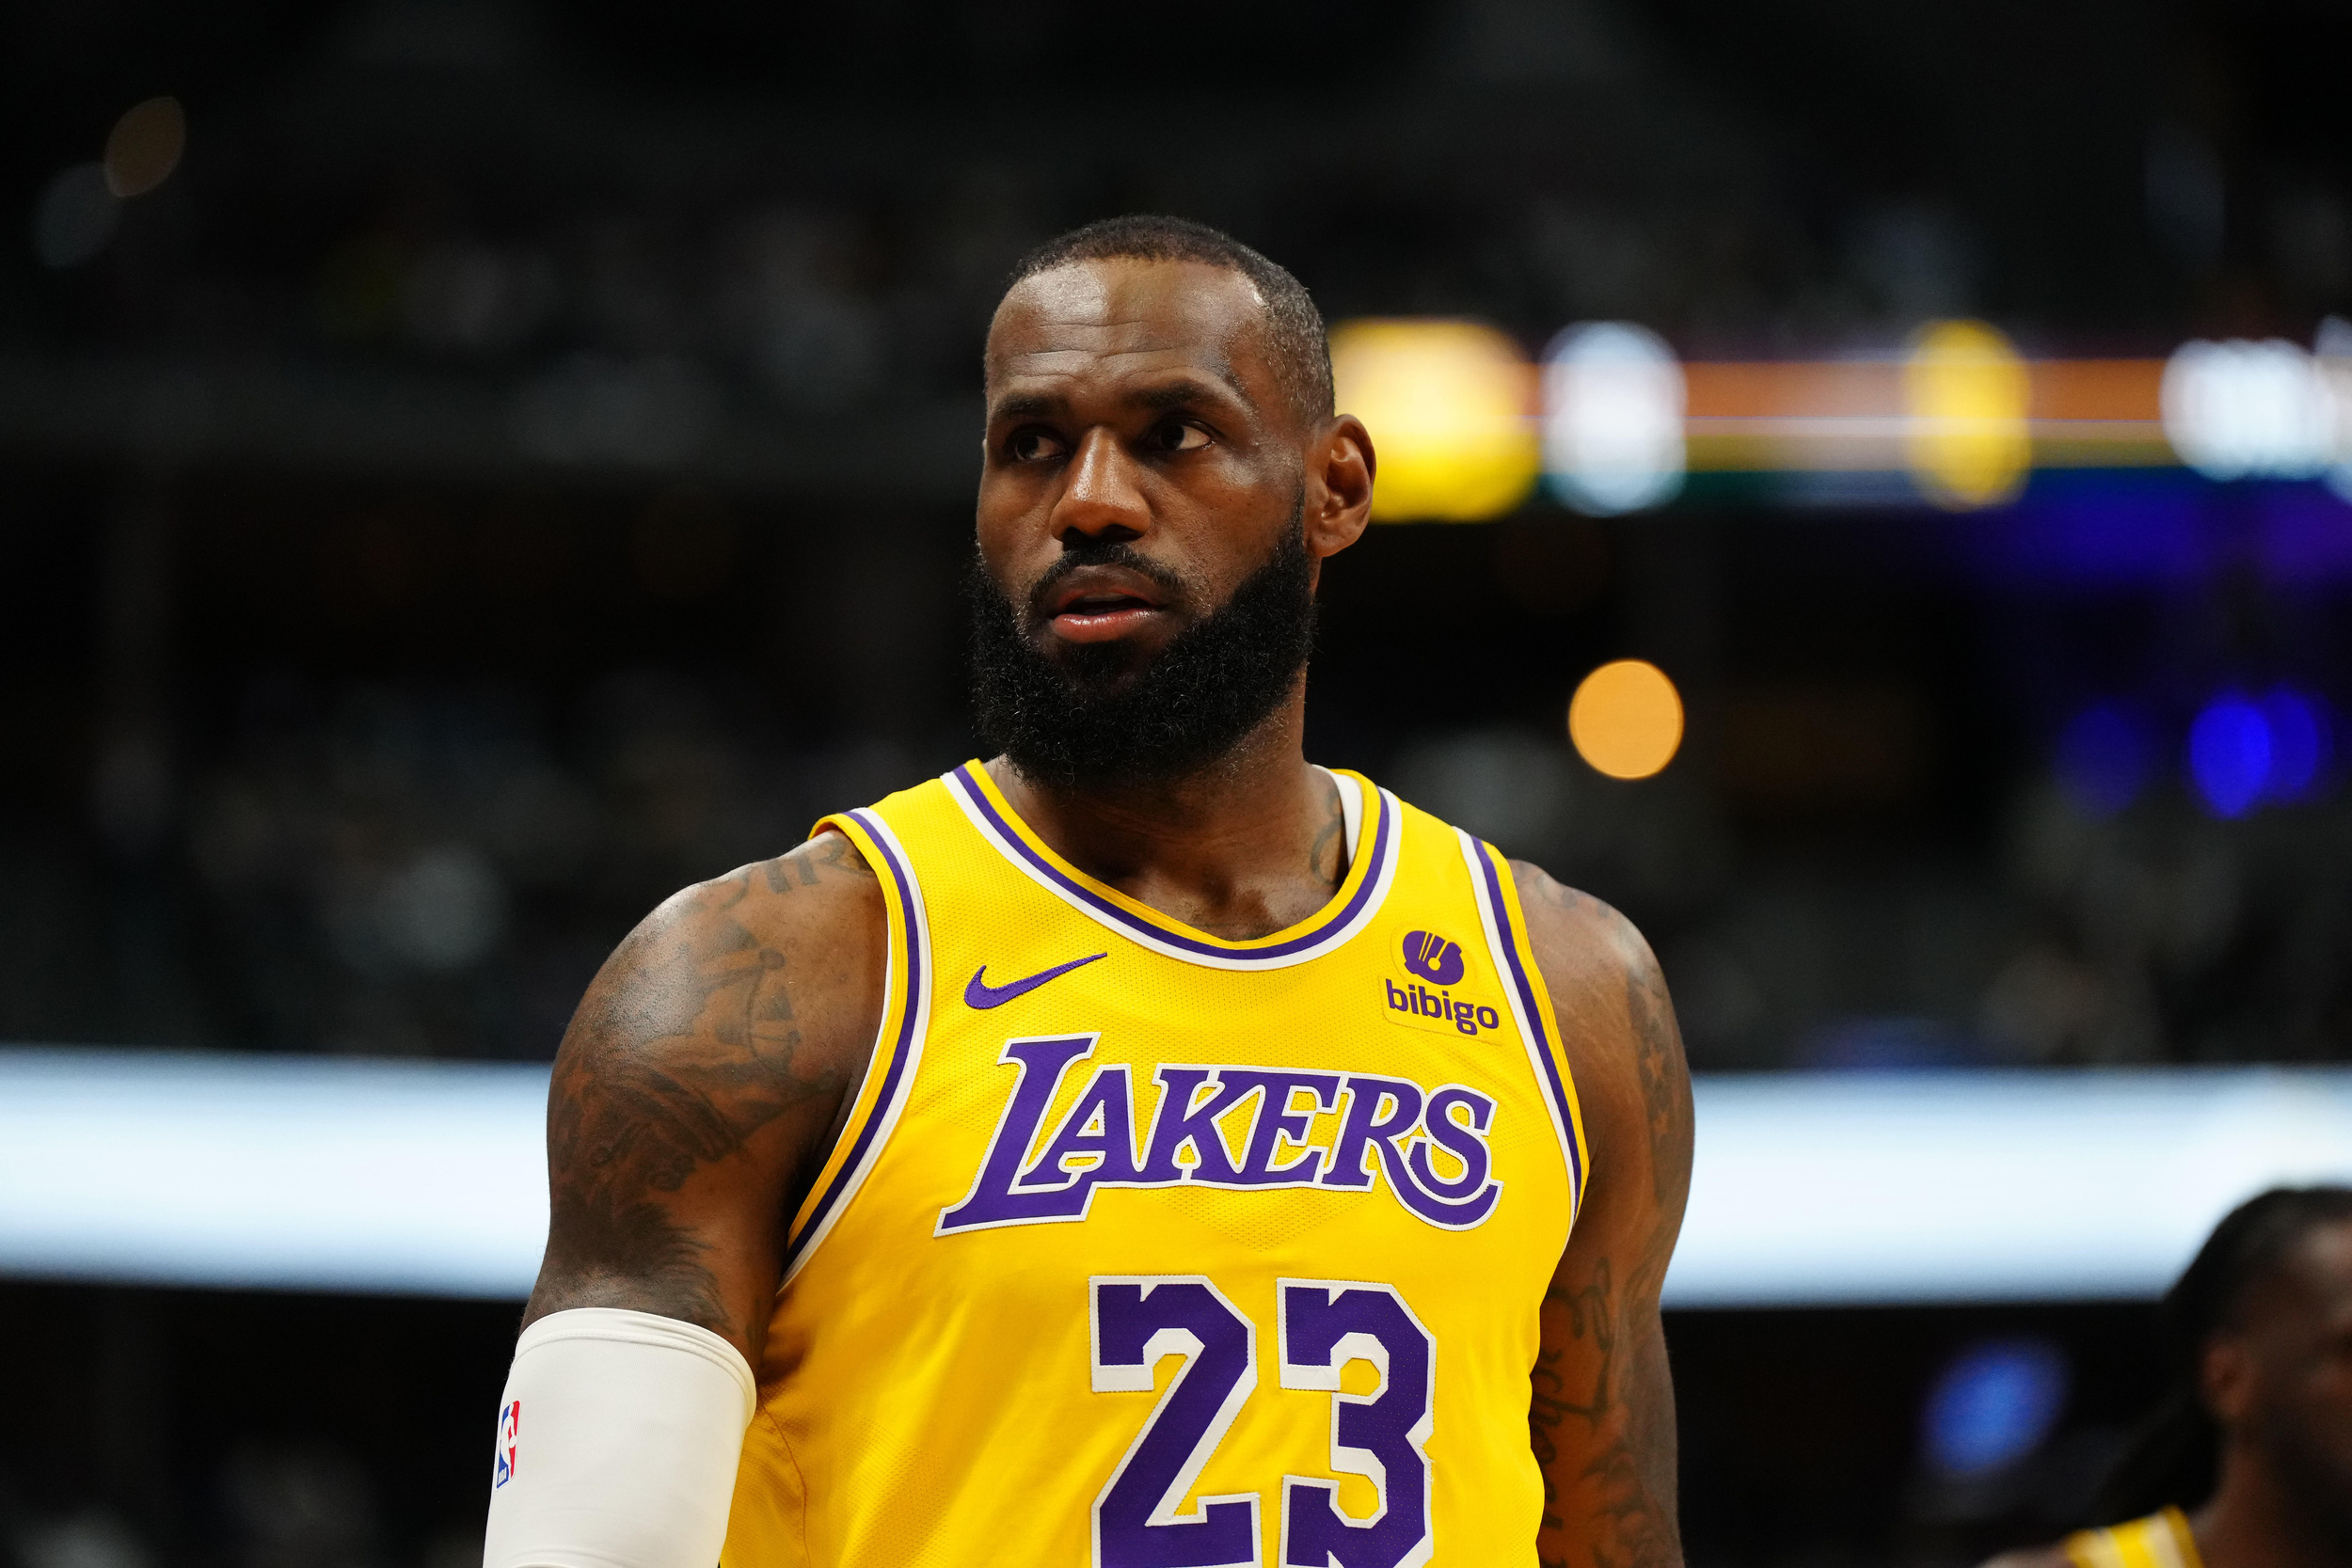 lakers unhappy with officiating in heartbreaking game 2 loss